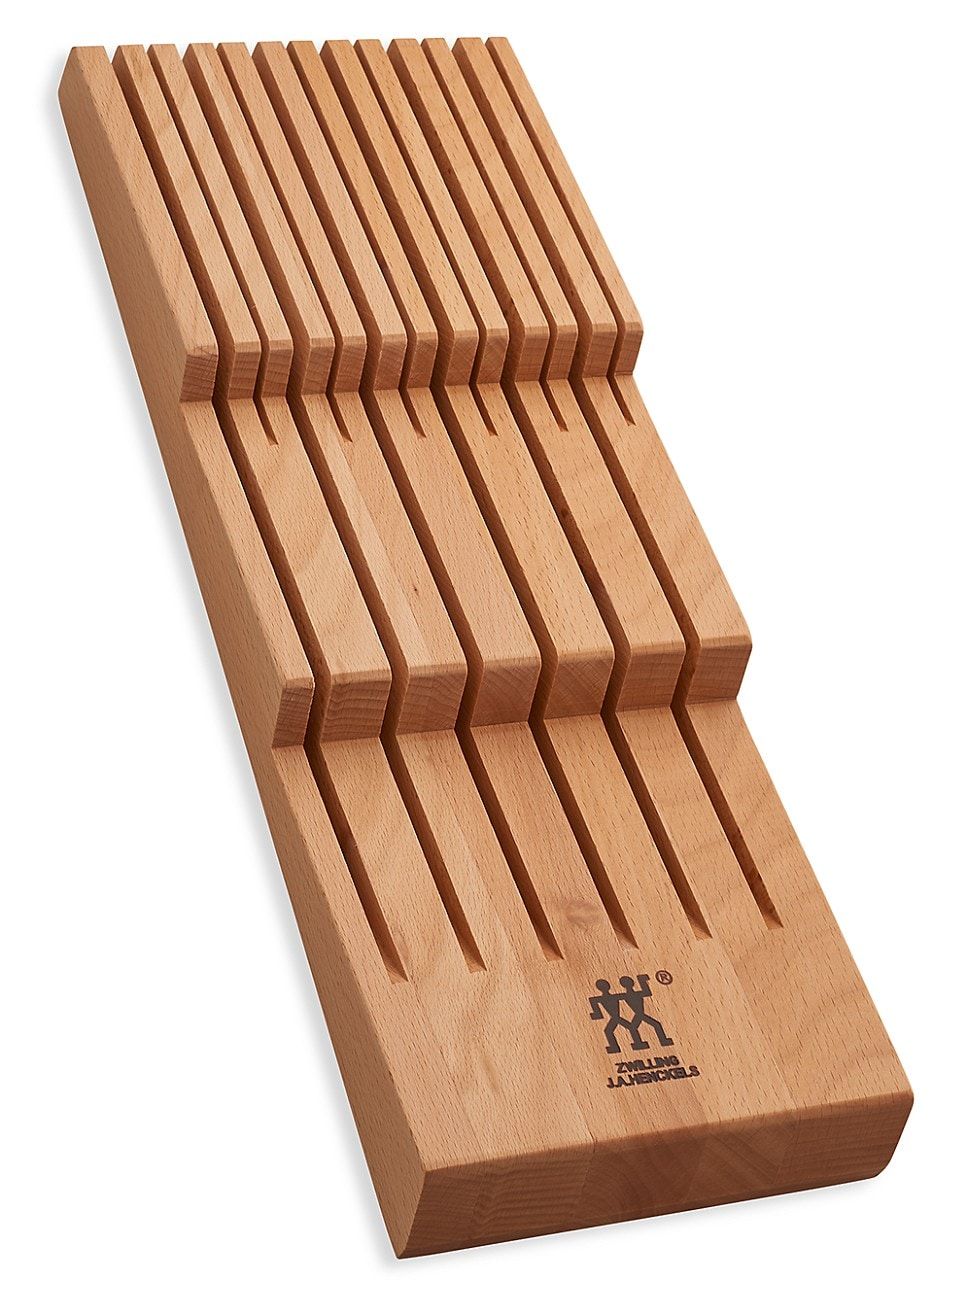 In-Drawer Knife Organizer - 12 Slot - Bamboo | Saks Fifth Avenue